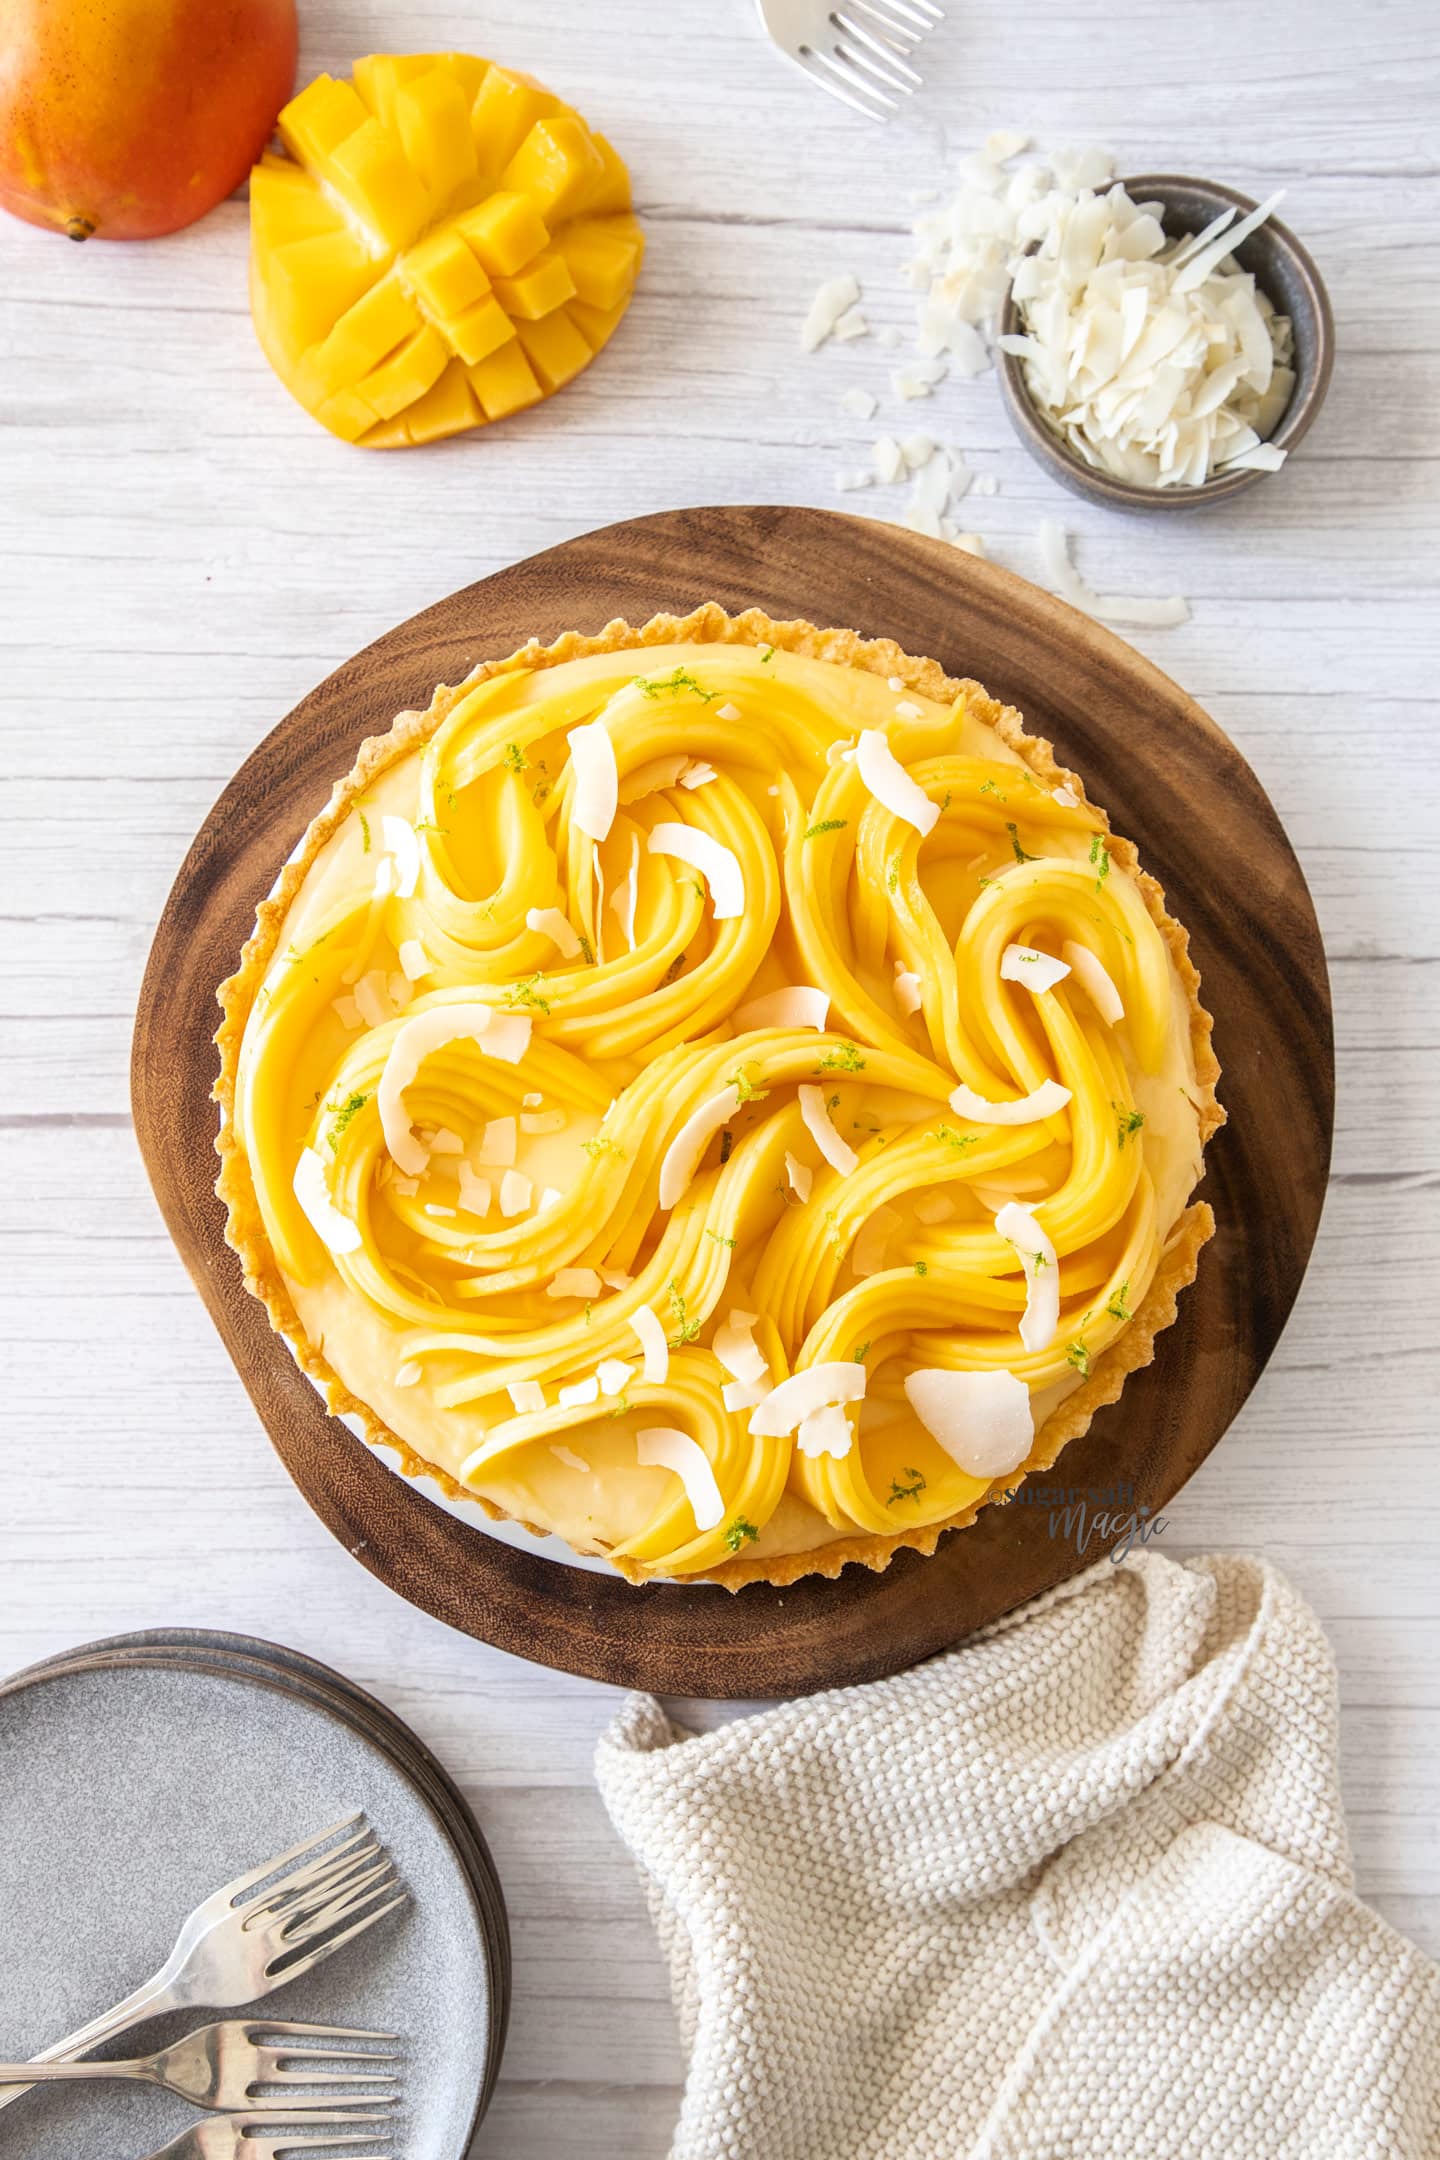 Top down view of a tart covered in sliced mango sitting on a wooden board.